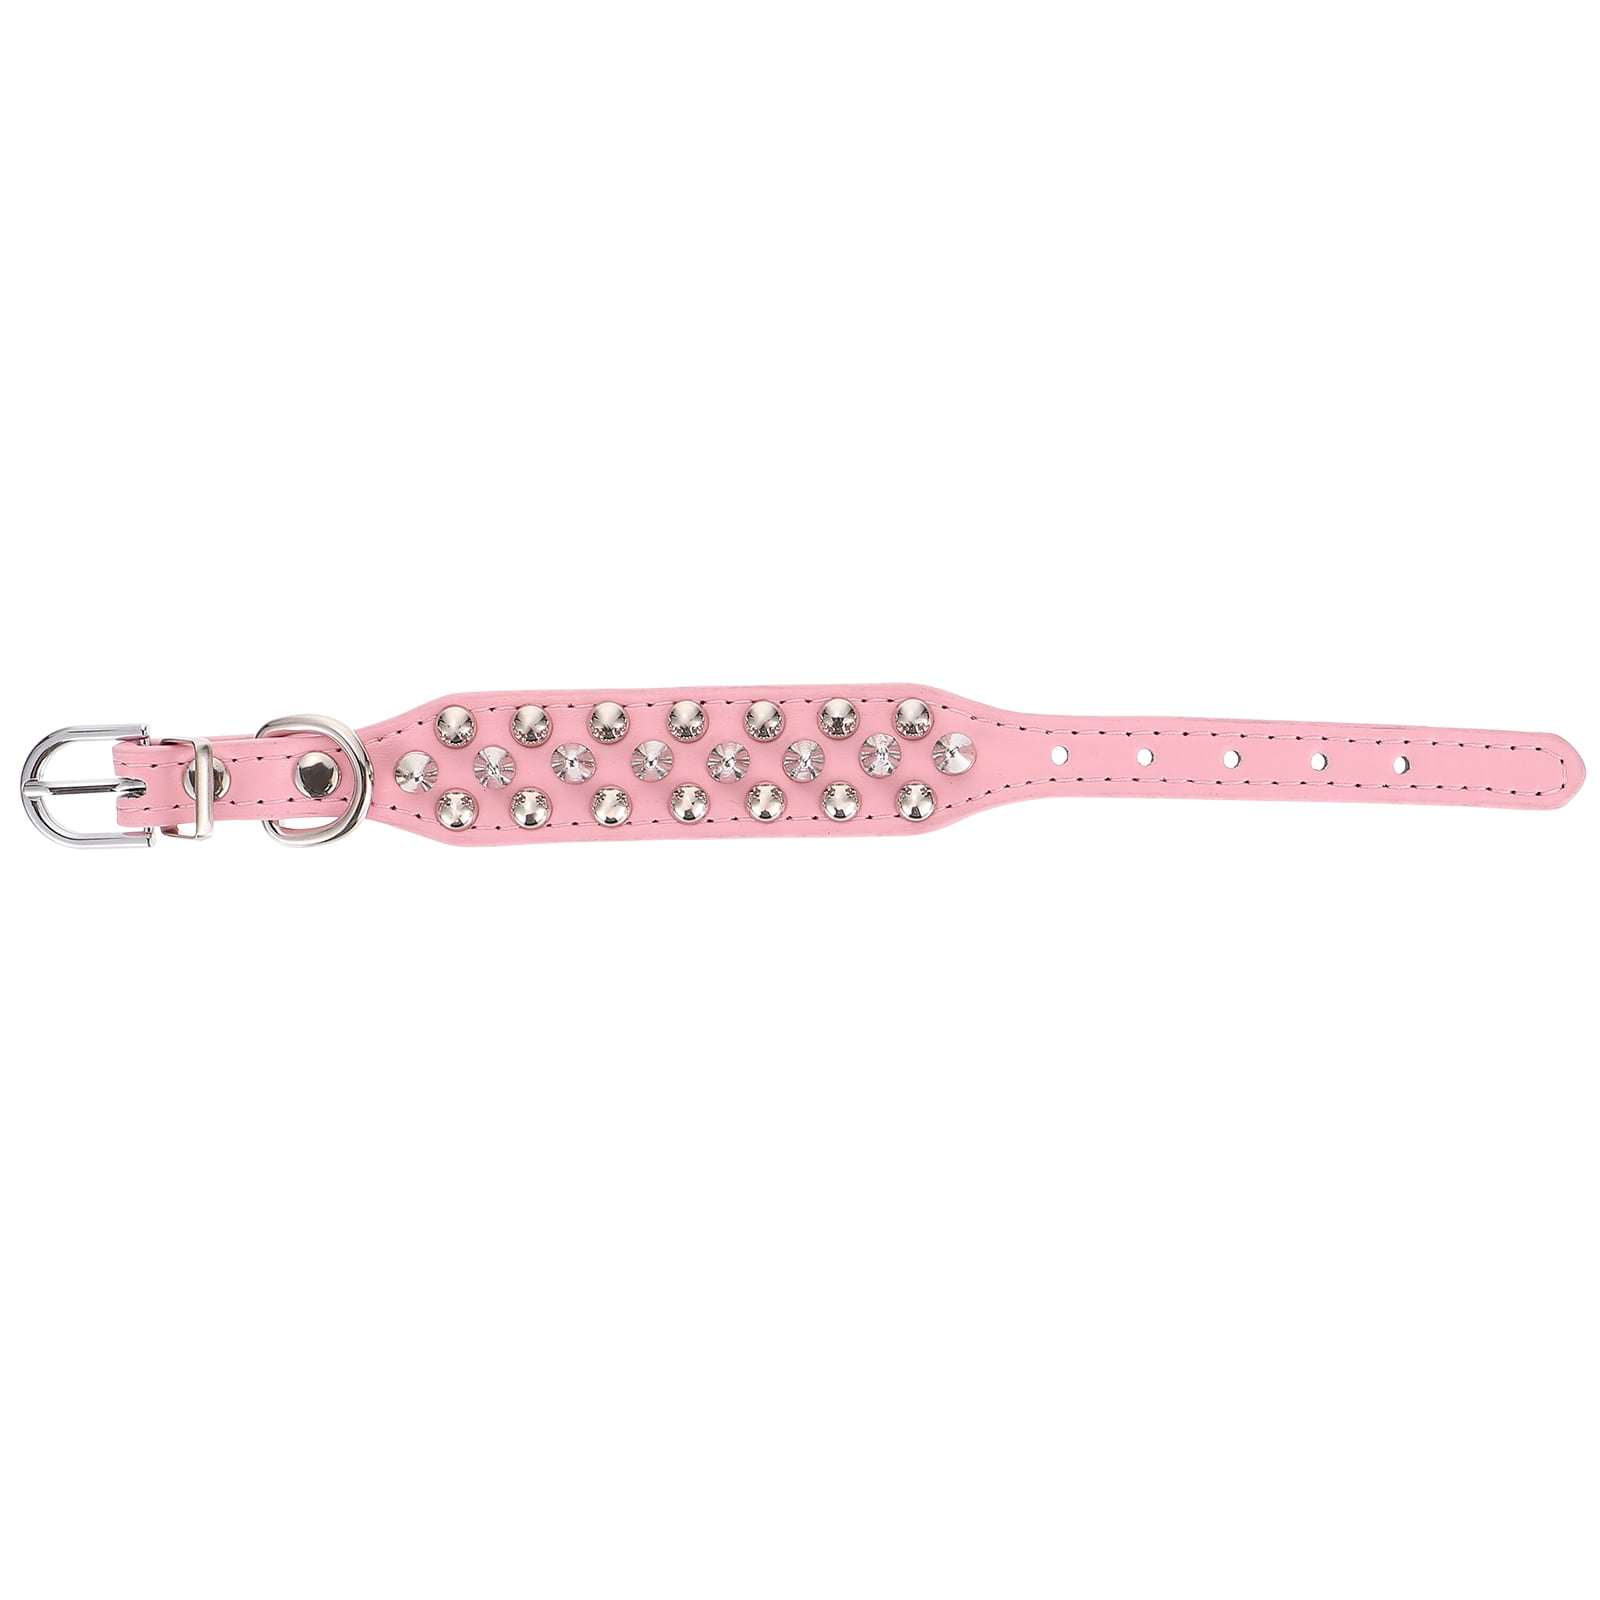 Stud Dog Collar Studded Puppy Neck Chain Collars for Puppies Decorate ...